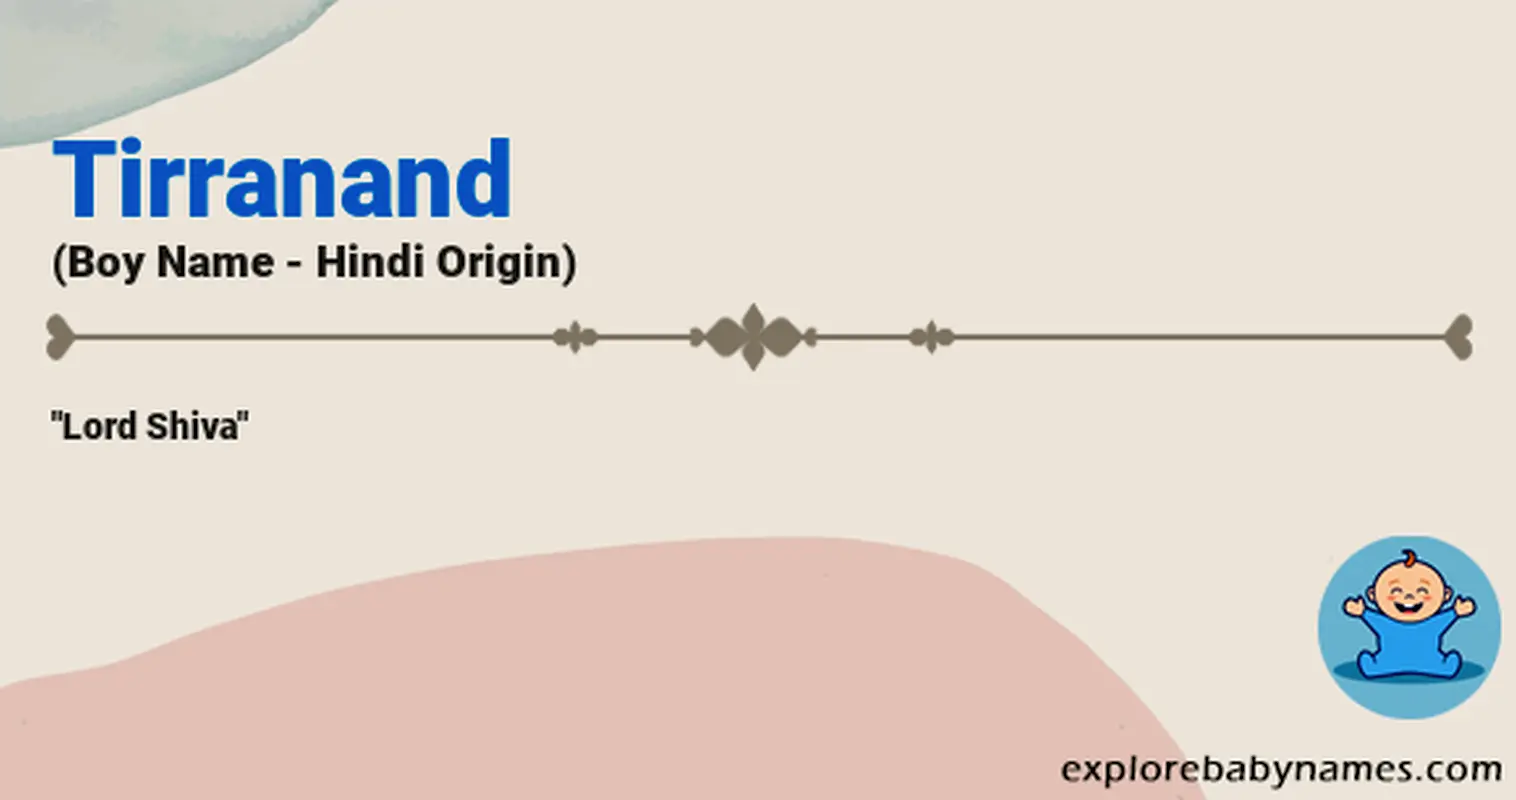 Meaning of Tirranand